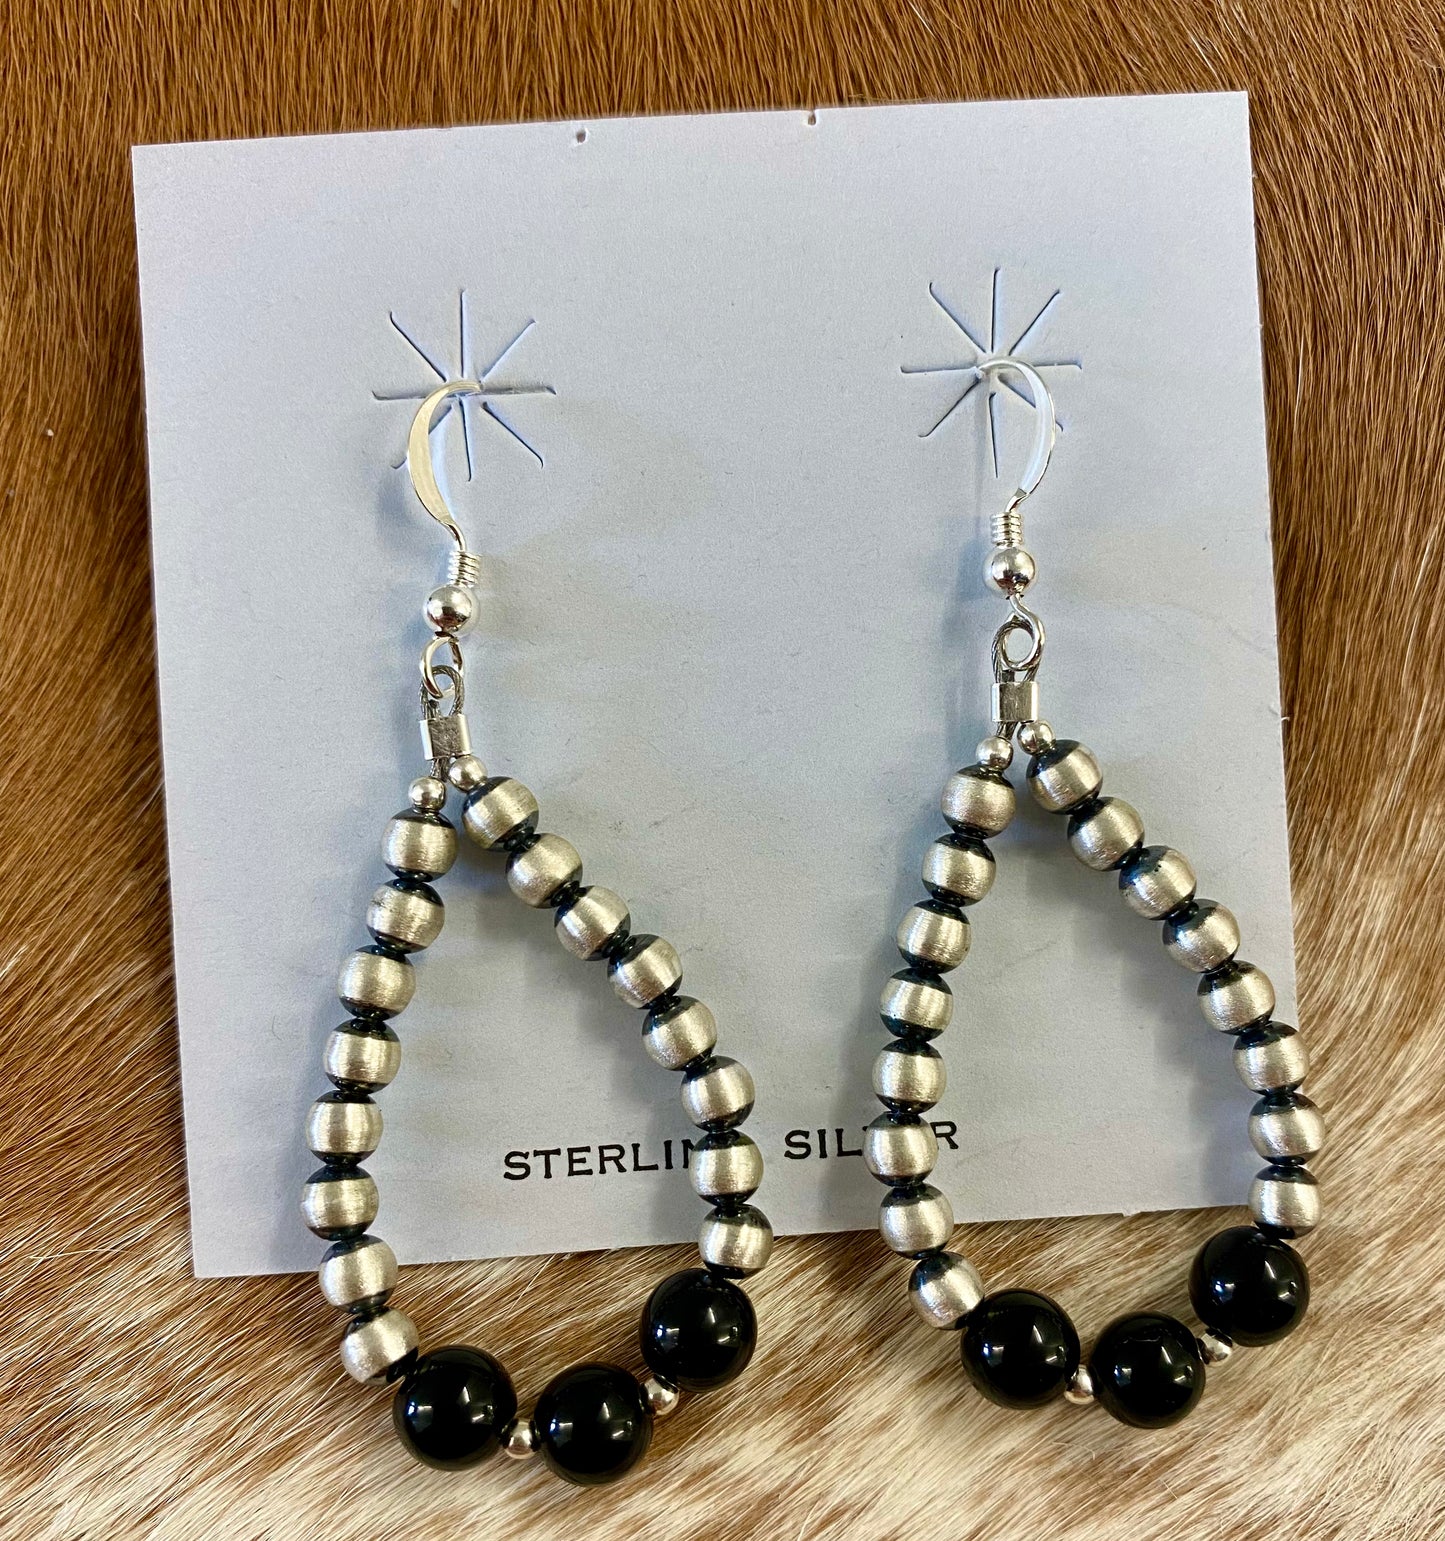 ﻿Stunning lightweight teardrop shape hook simple yet elegant sterling silver Navajo Pearl earrings with onyx. These Navajo pearl style teardrop earrings are hand strung together. Each of the sterling components are soldered closed to ensure durability and peace of mind.  Size: 2” inches length x 1” inch width   Stone: Onyx 